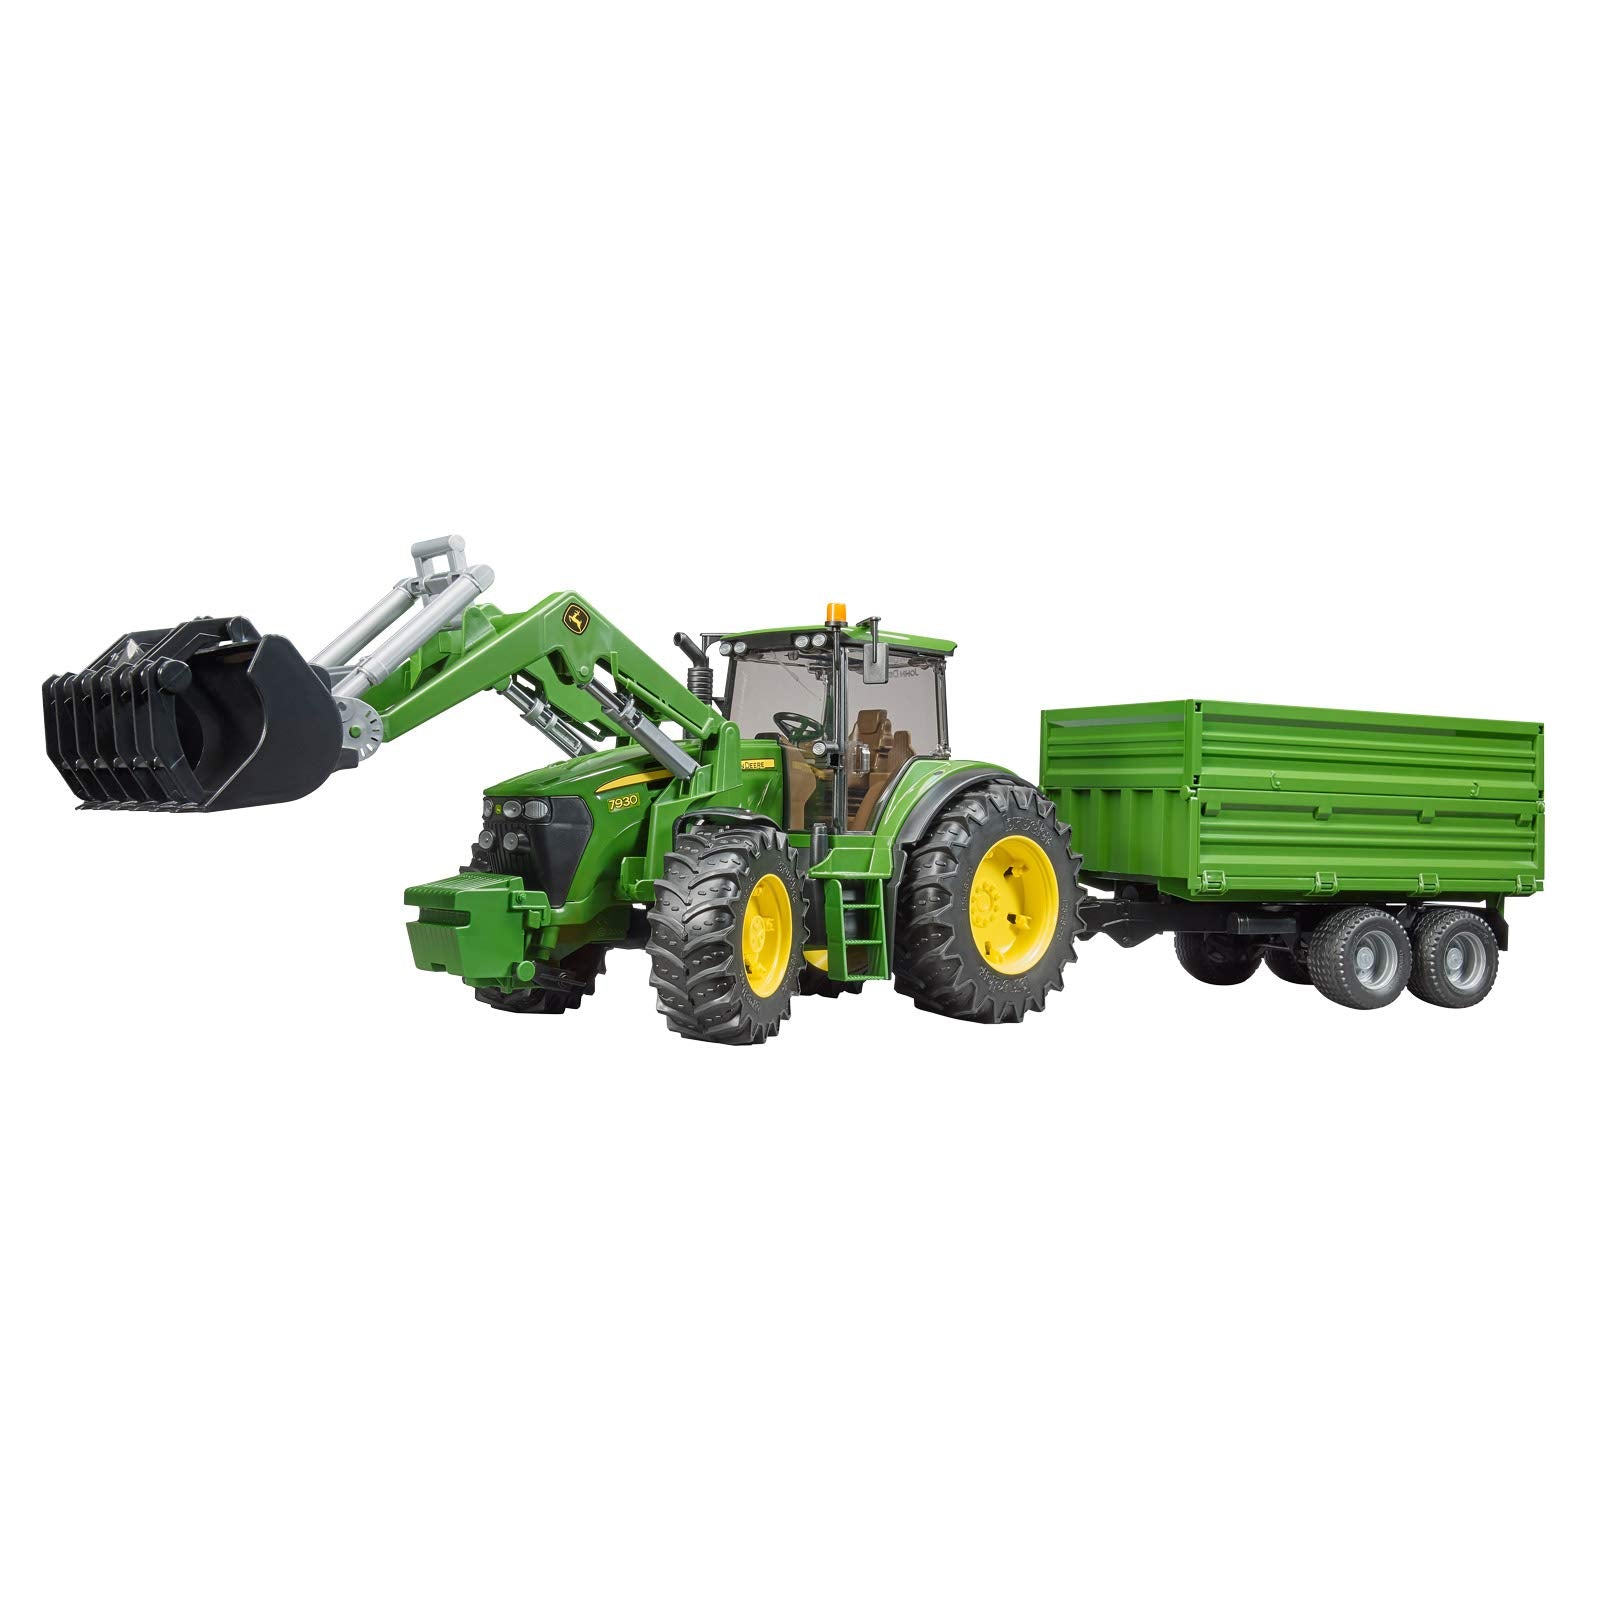 Bruder 03055 1/16 John Deere 7930 Tractor with Frontloader and Tandem Axle Tipping Trailer